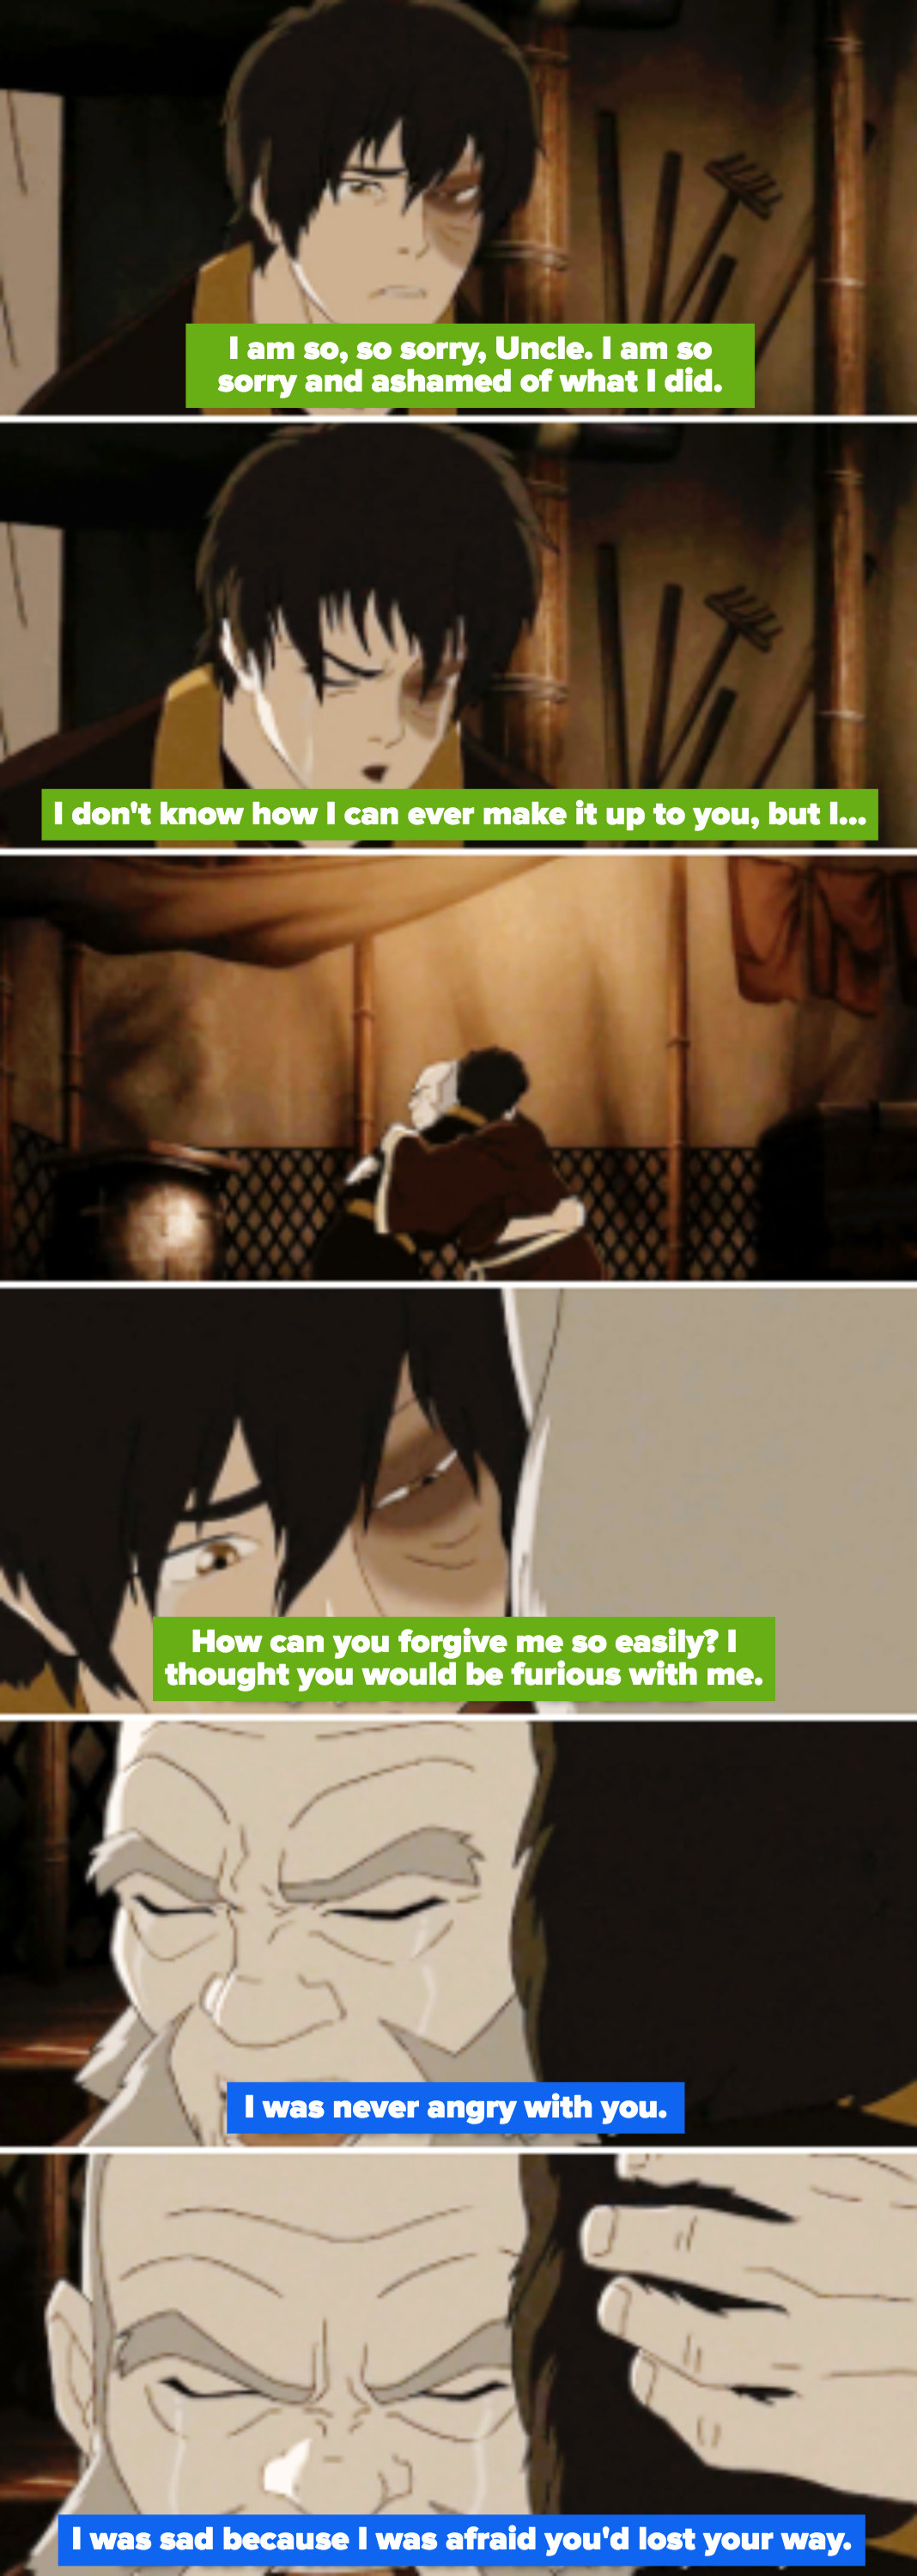 Zuko and his uncle embracing on the floor